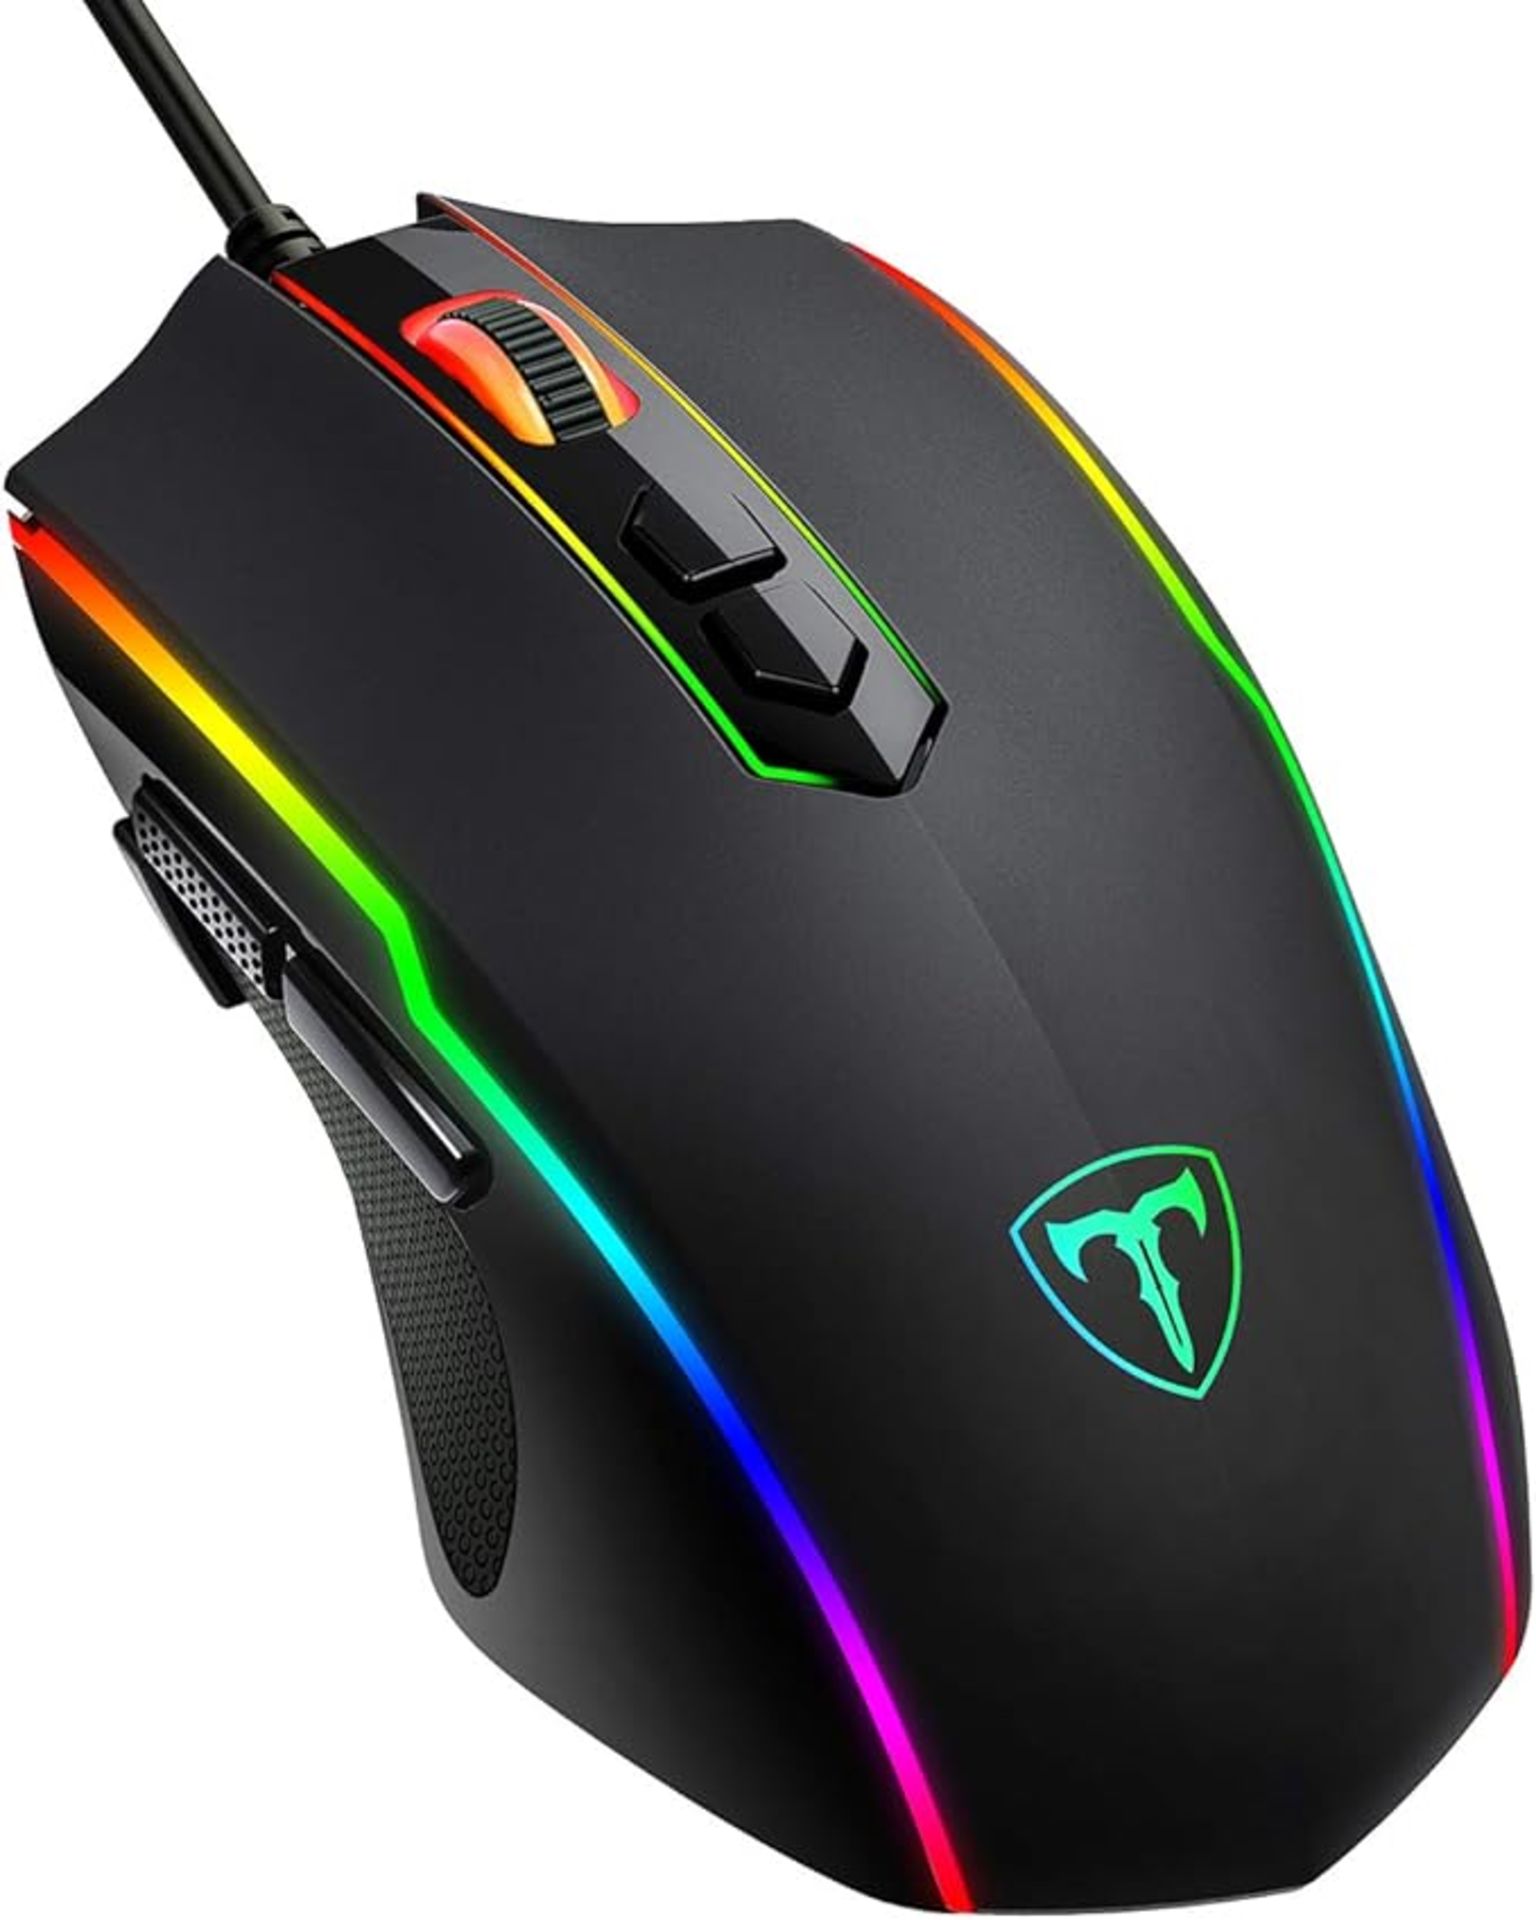 RGB Gaming Mouse Wired,Vollion PC Gaming Mice with 8 Programmable Buttons - P6.,Chroma RGB